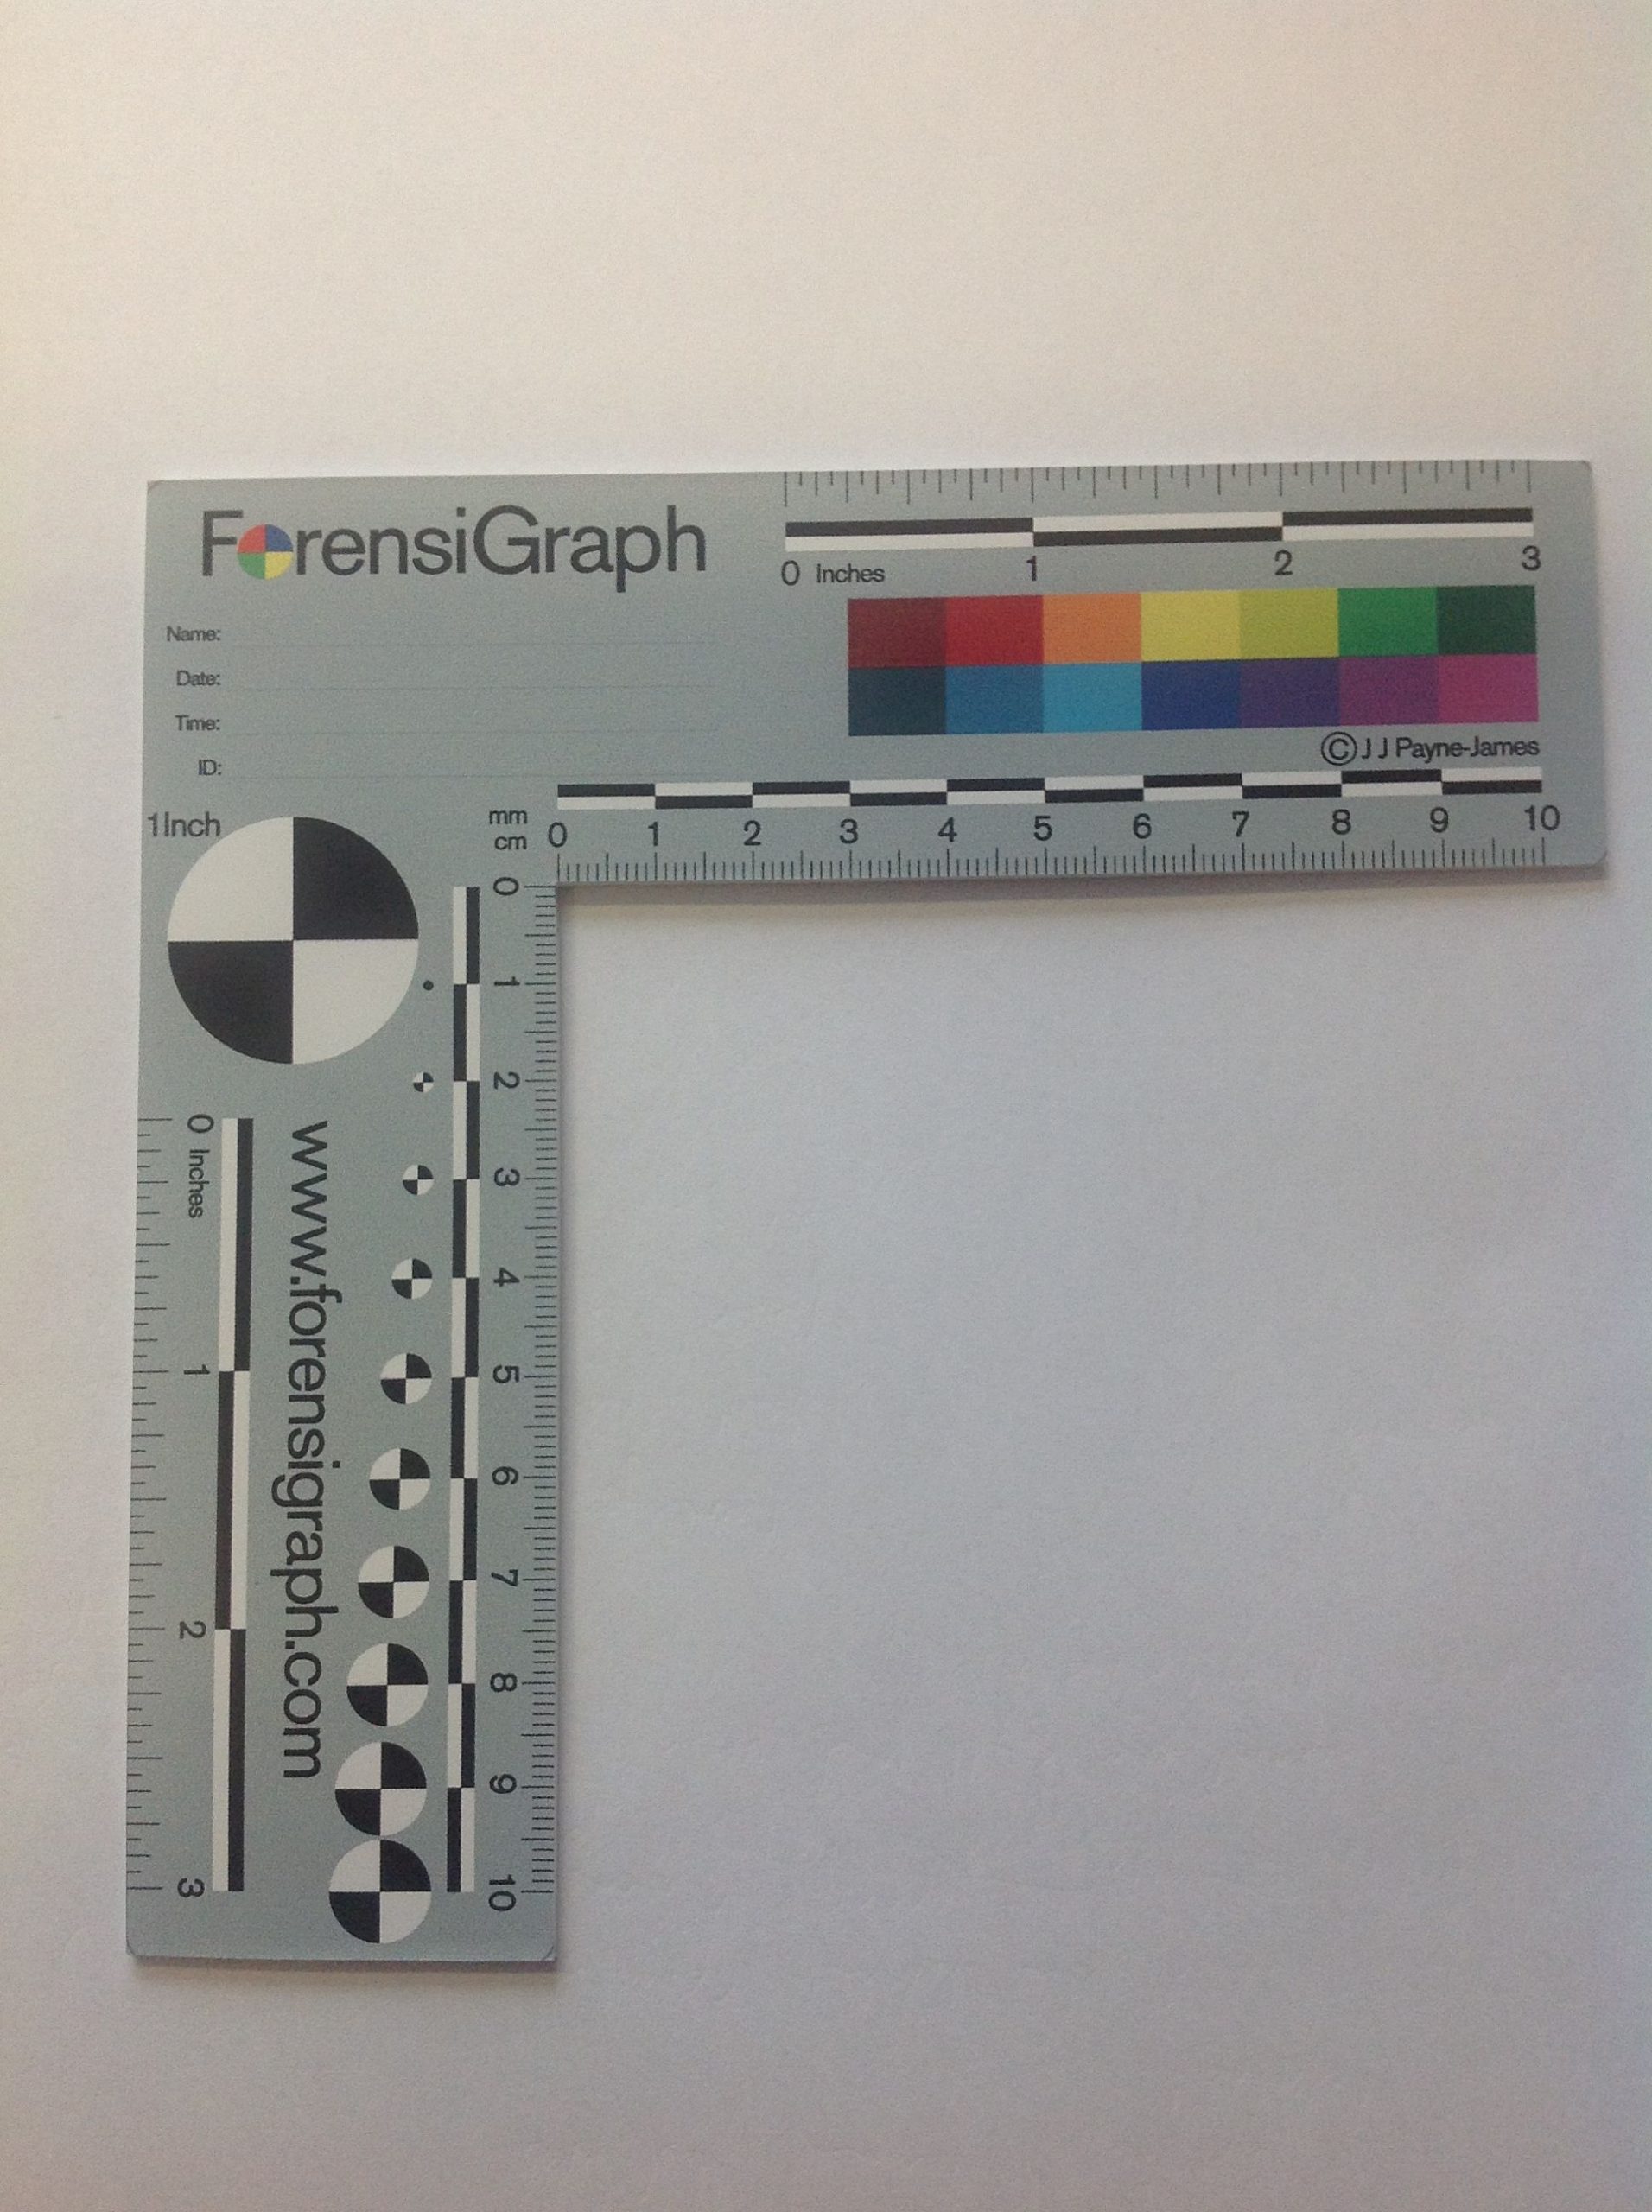 New Colour Forensic Scale Criminology, Forensics Printable Ruler